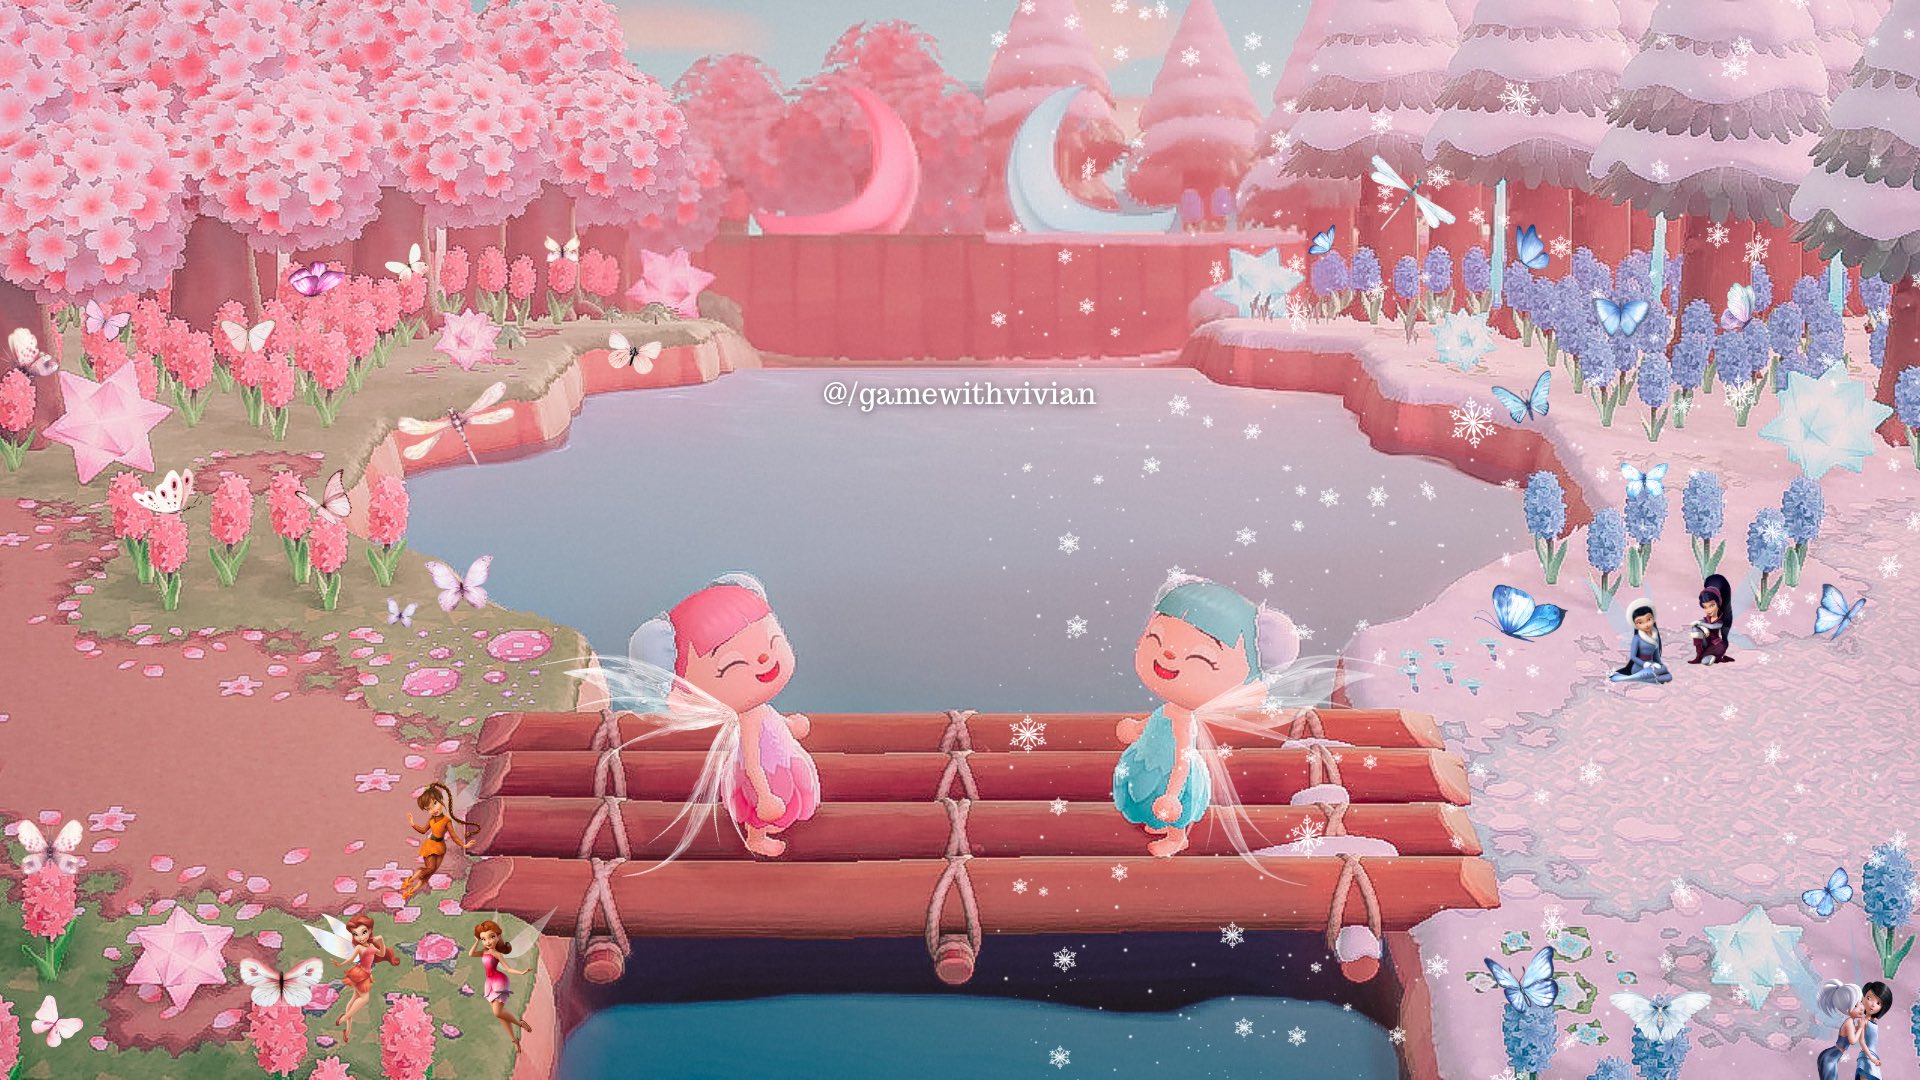 Vivian ღ - ♡ Secret of the wings. ♡ (Or at least my version of it.) • #AnimalCrossing #AnimalCrossingNewHorizons #NewHorizons #ACNH # Fairycore #ACNHFairycore #ACNHInspo #ACNHDesigns